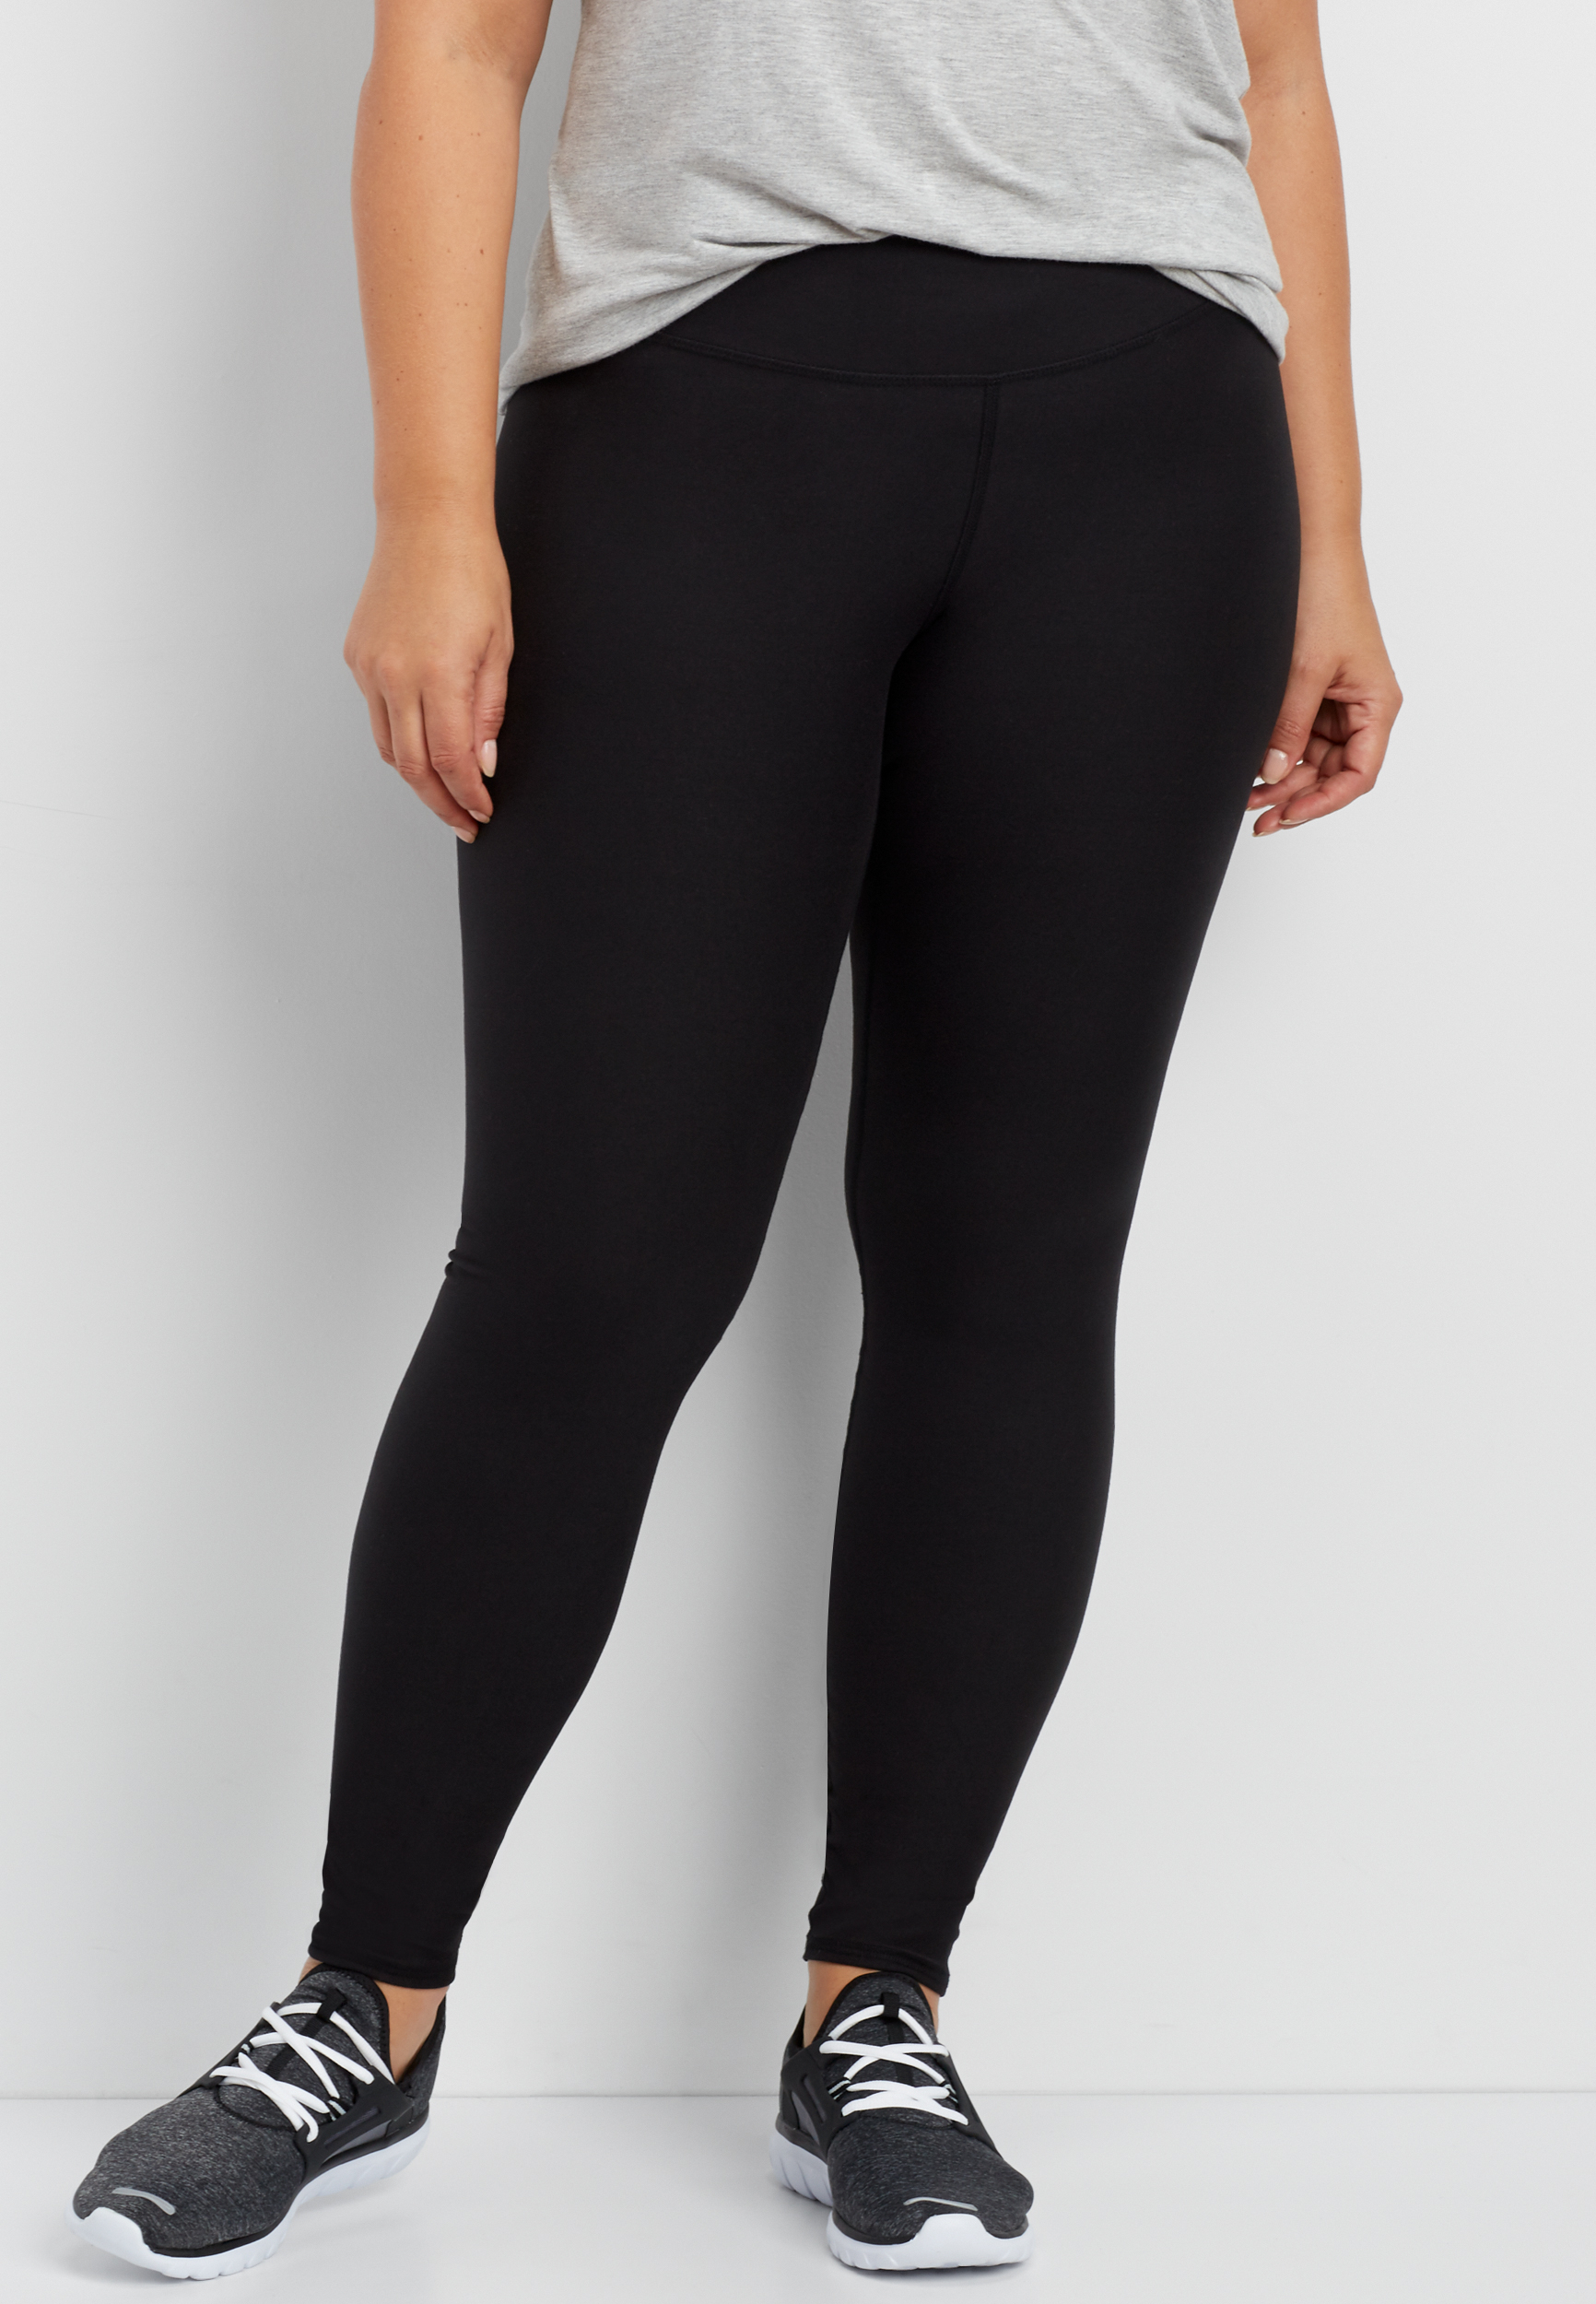 OLD plus size active legging | maurices